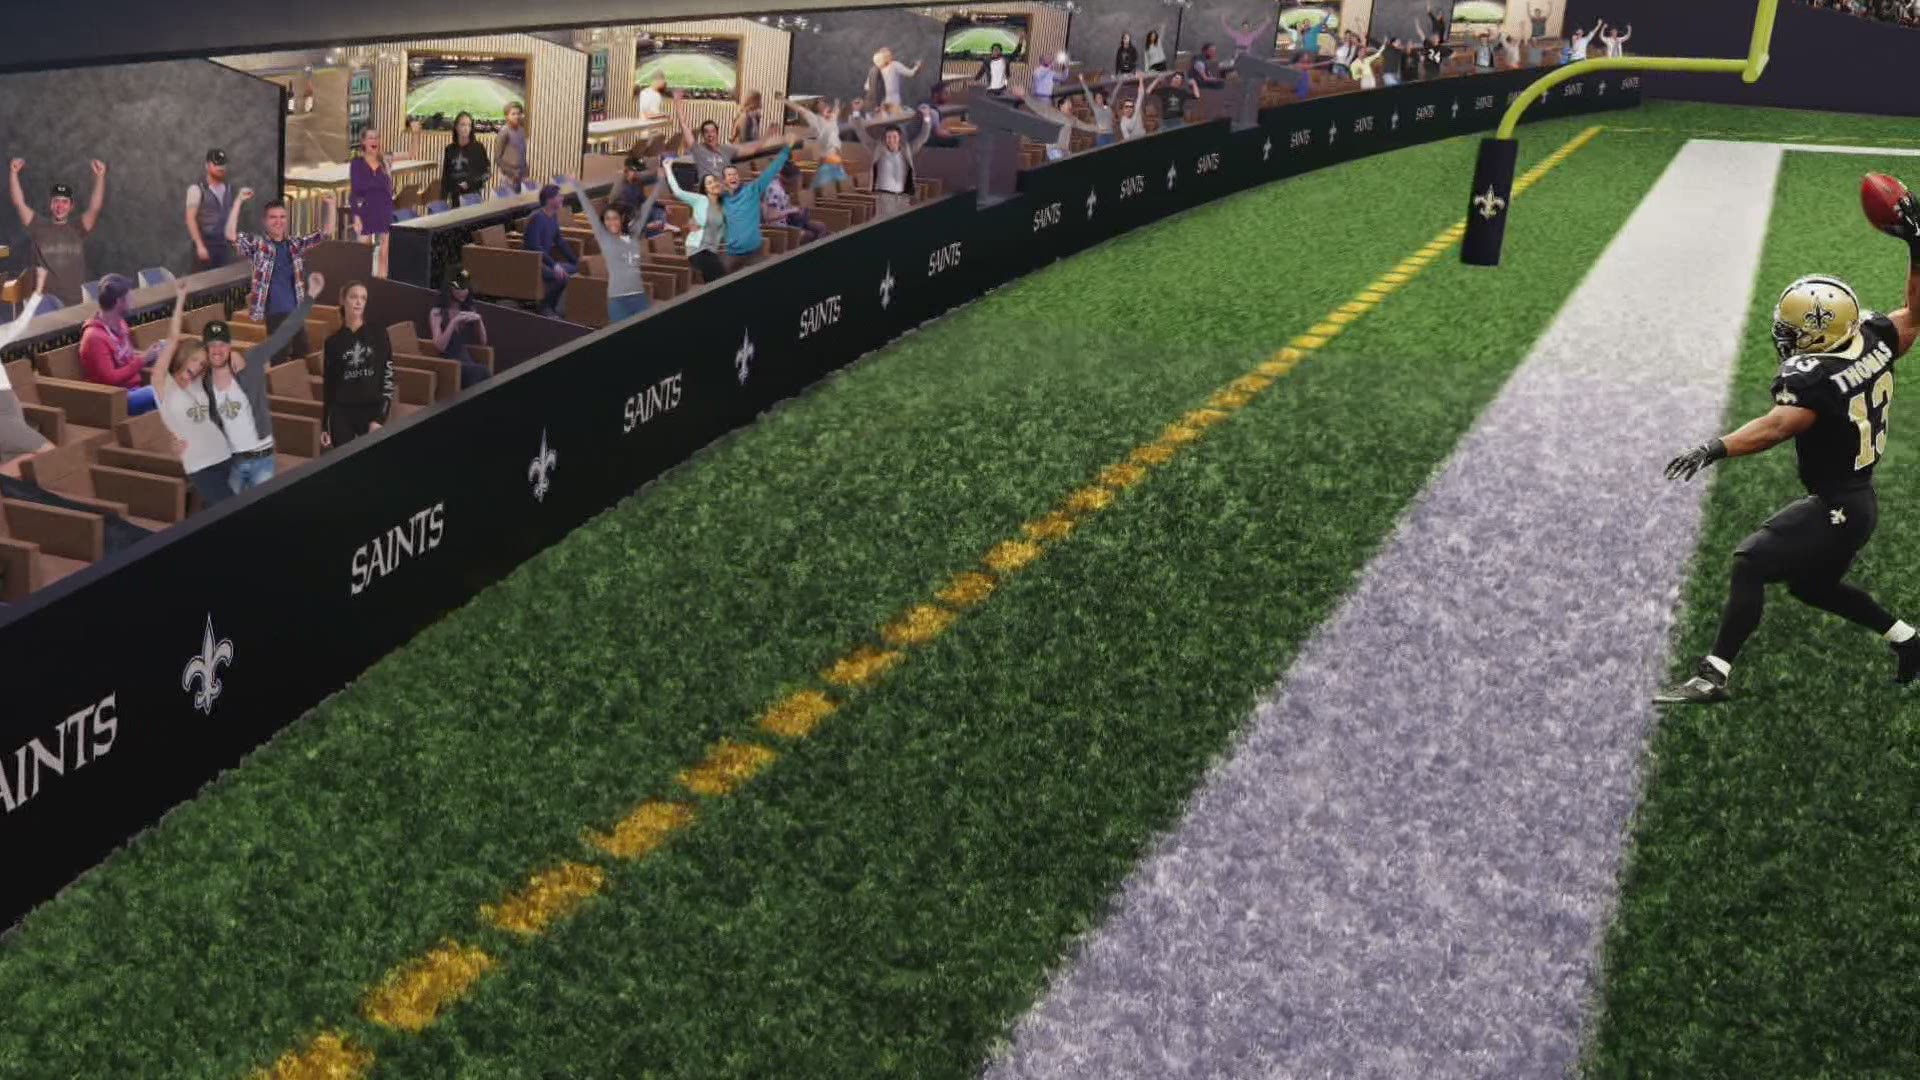 New suites will get you closer than ever to the action this Saints season.